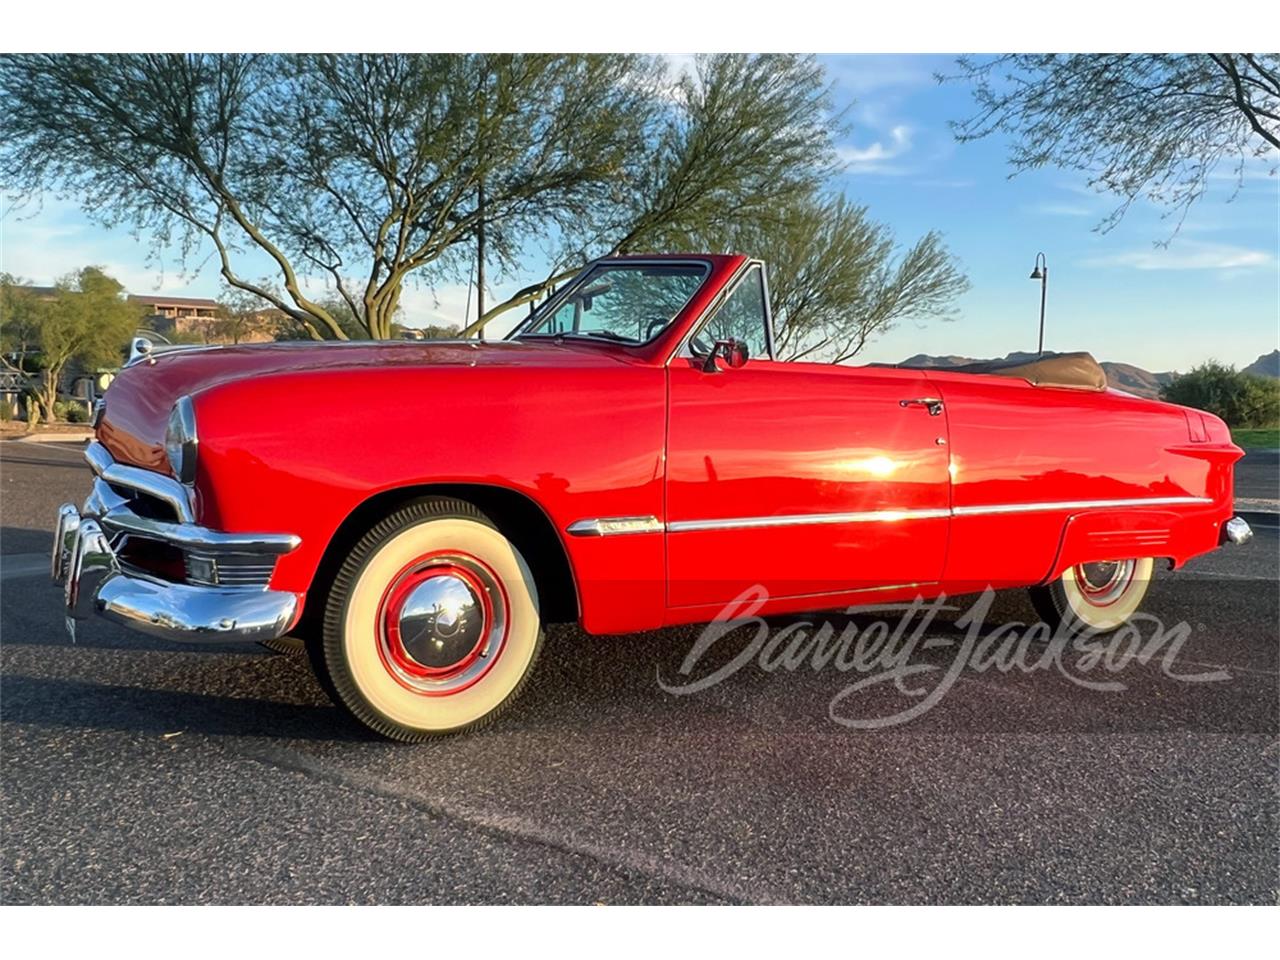 For Sale at Auction: 1950 Ford Custom in Scottsdale, Arizona for sale in Scottsdale, AZ